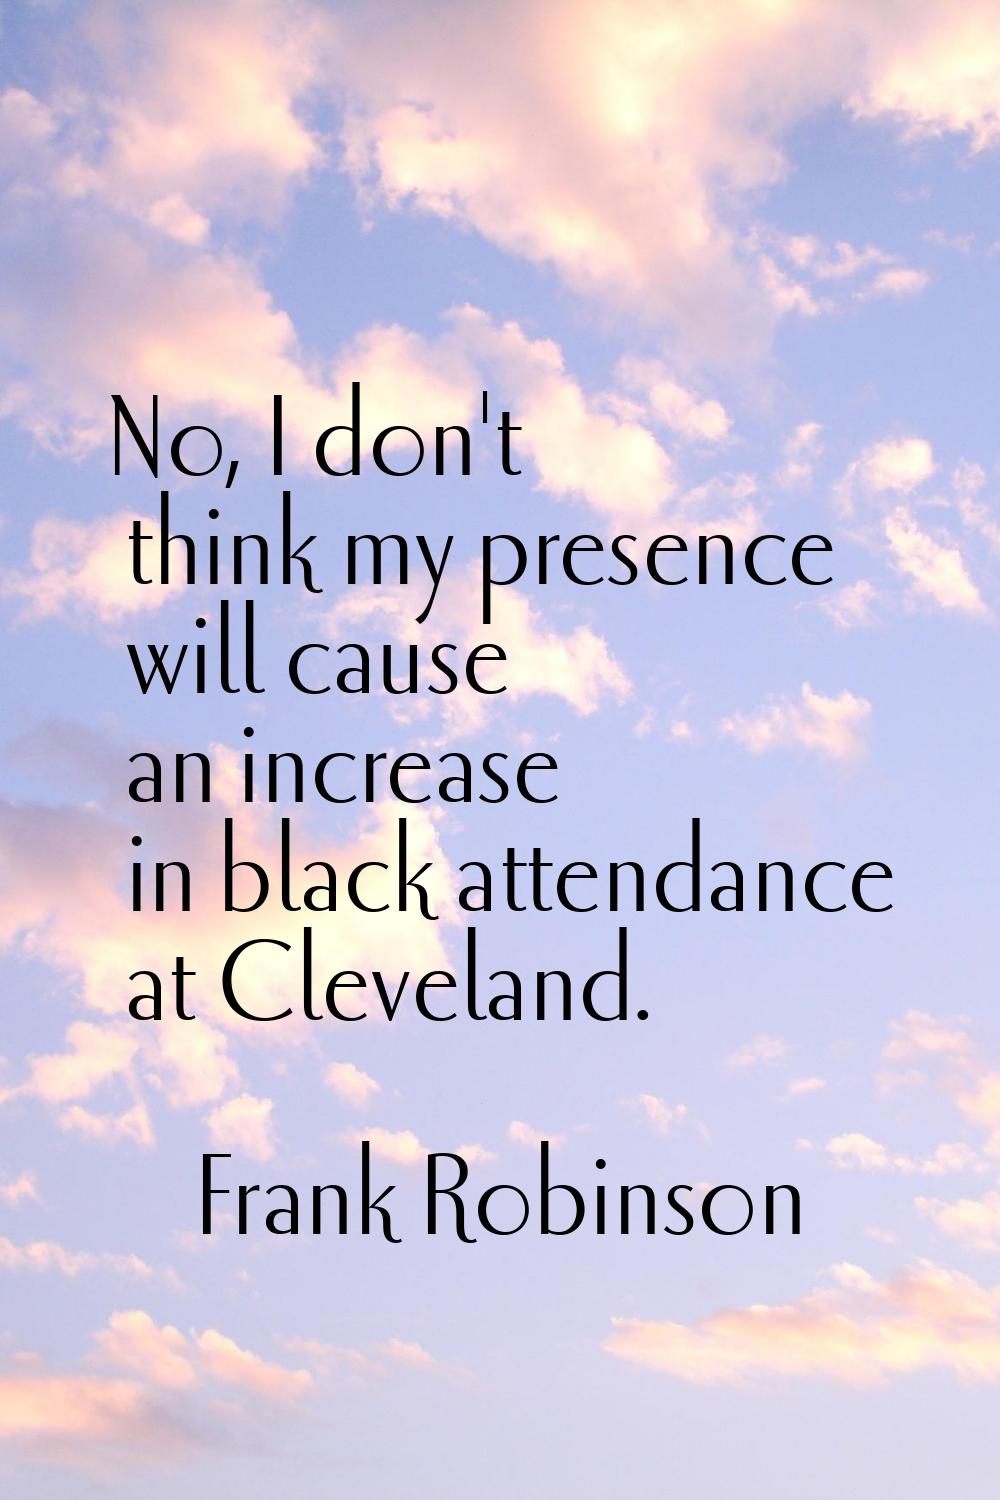 No, I don't think my presence will cause an increase in black attendance at Cleveland.